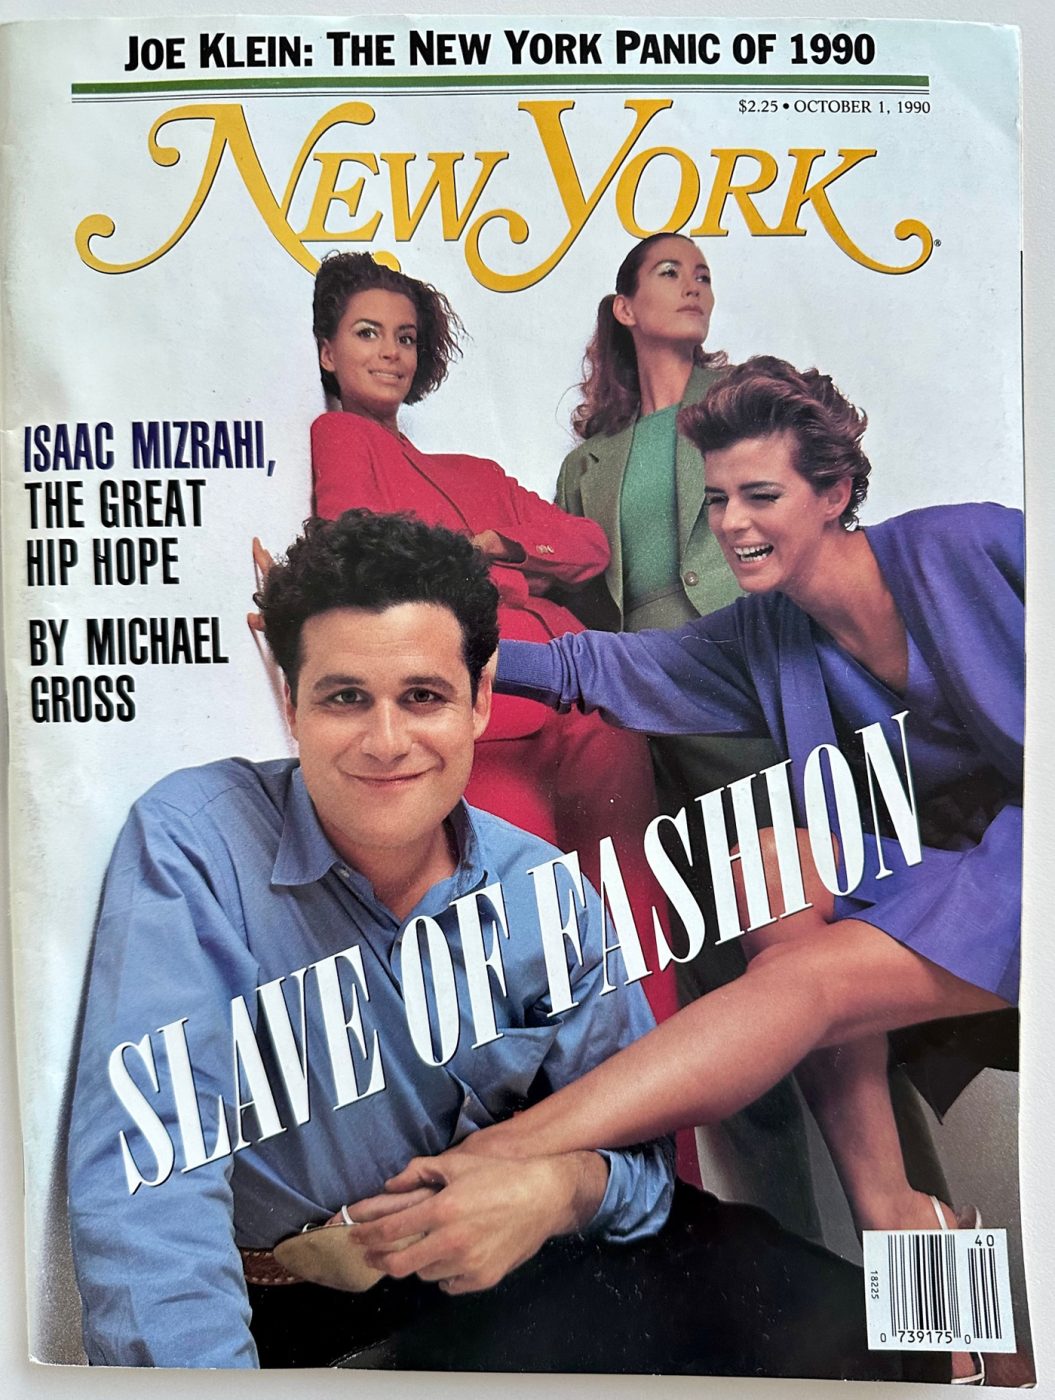 The cover of the October 1, 1990, issue of 'New York' magazine, featuring Isaac Mizrahi with three female models